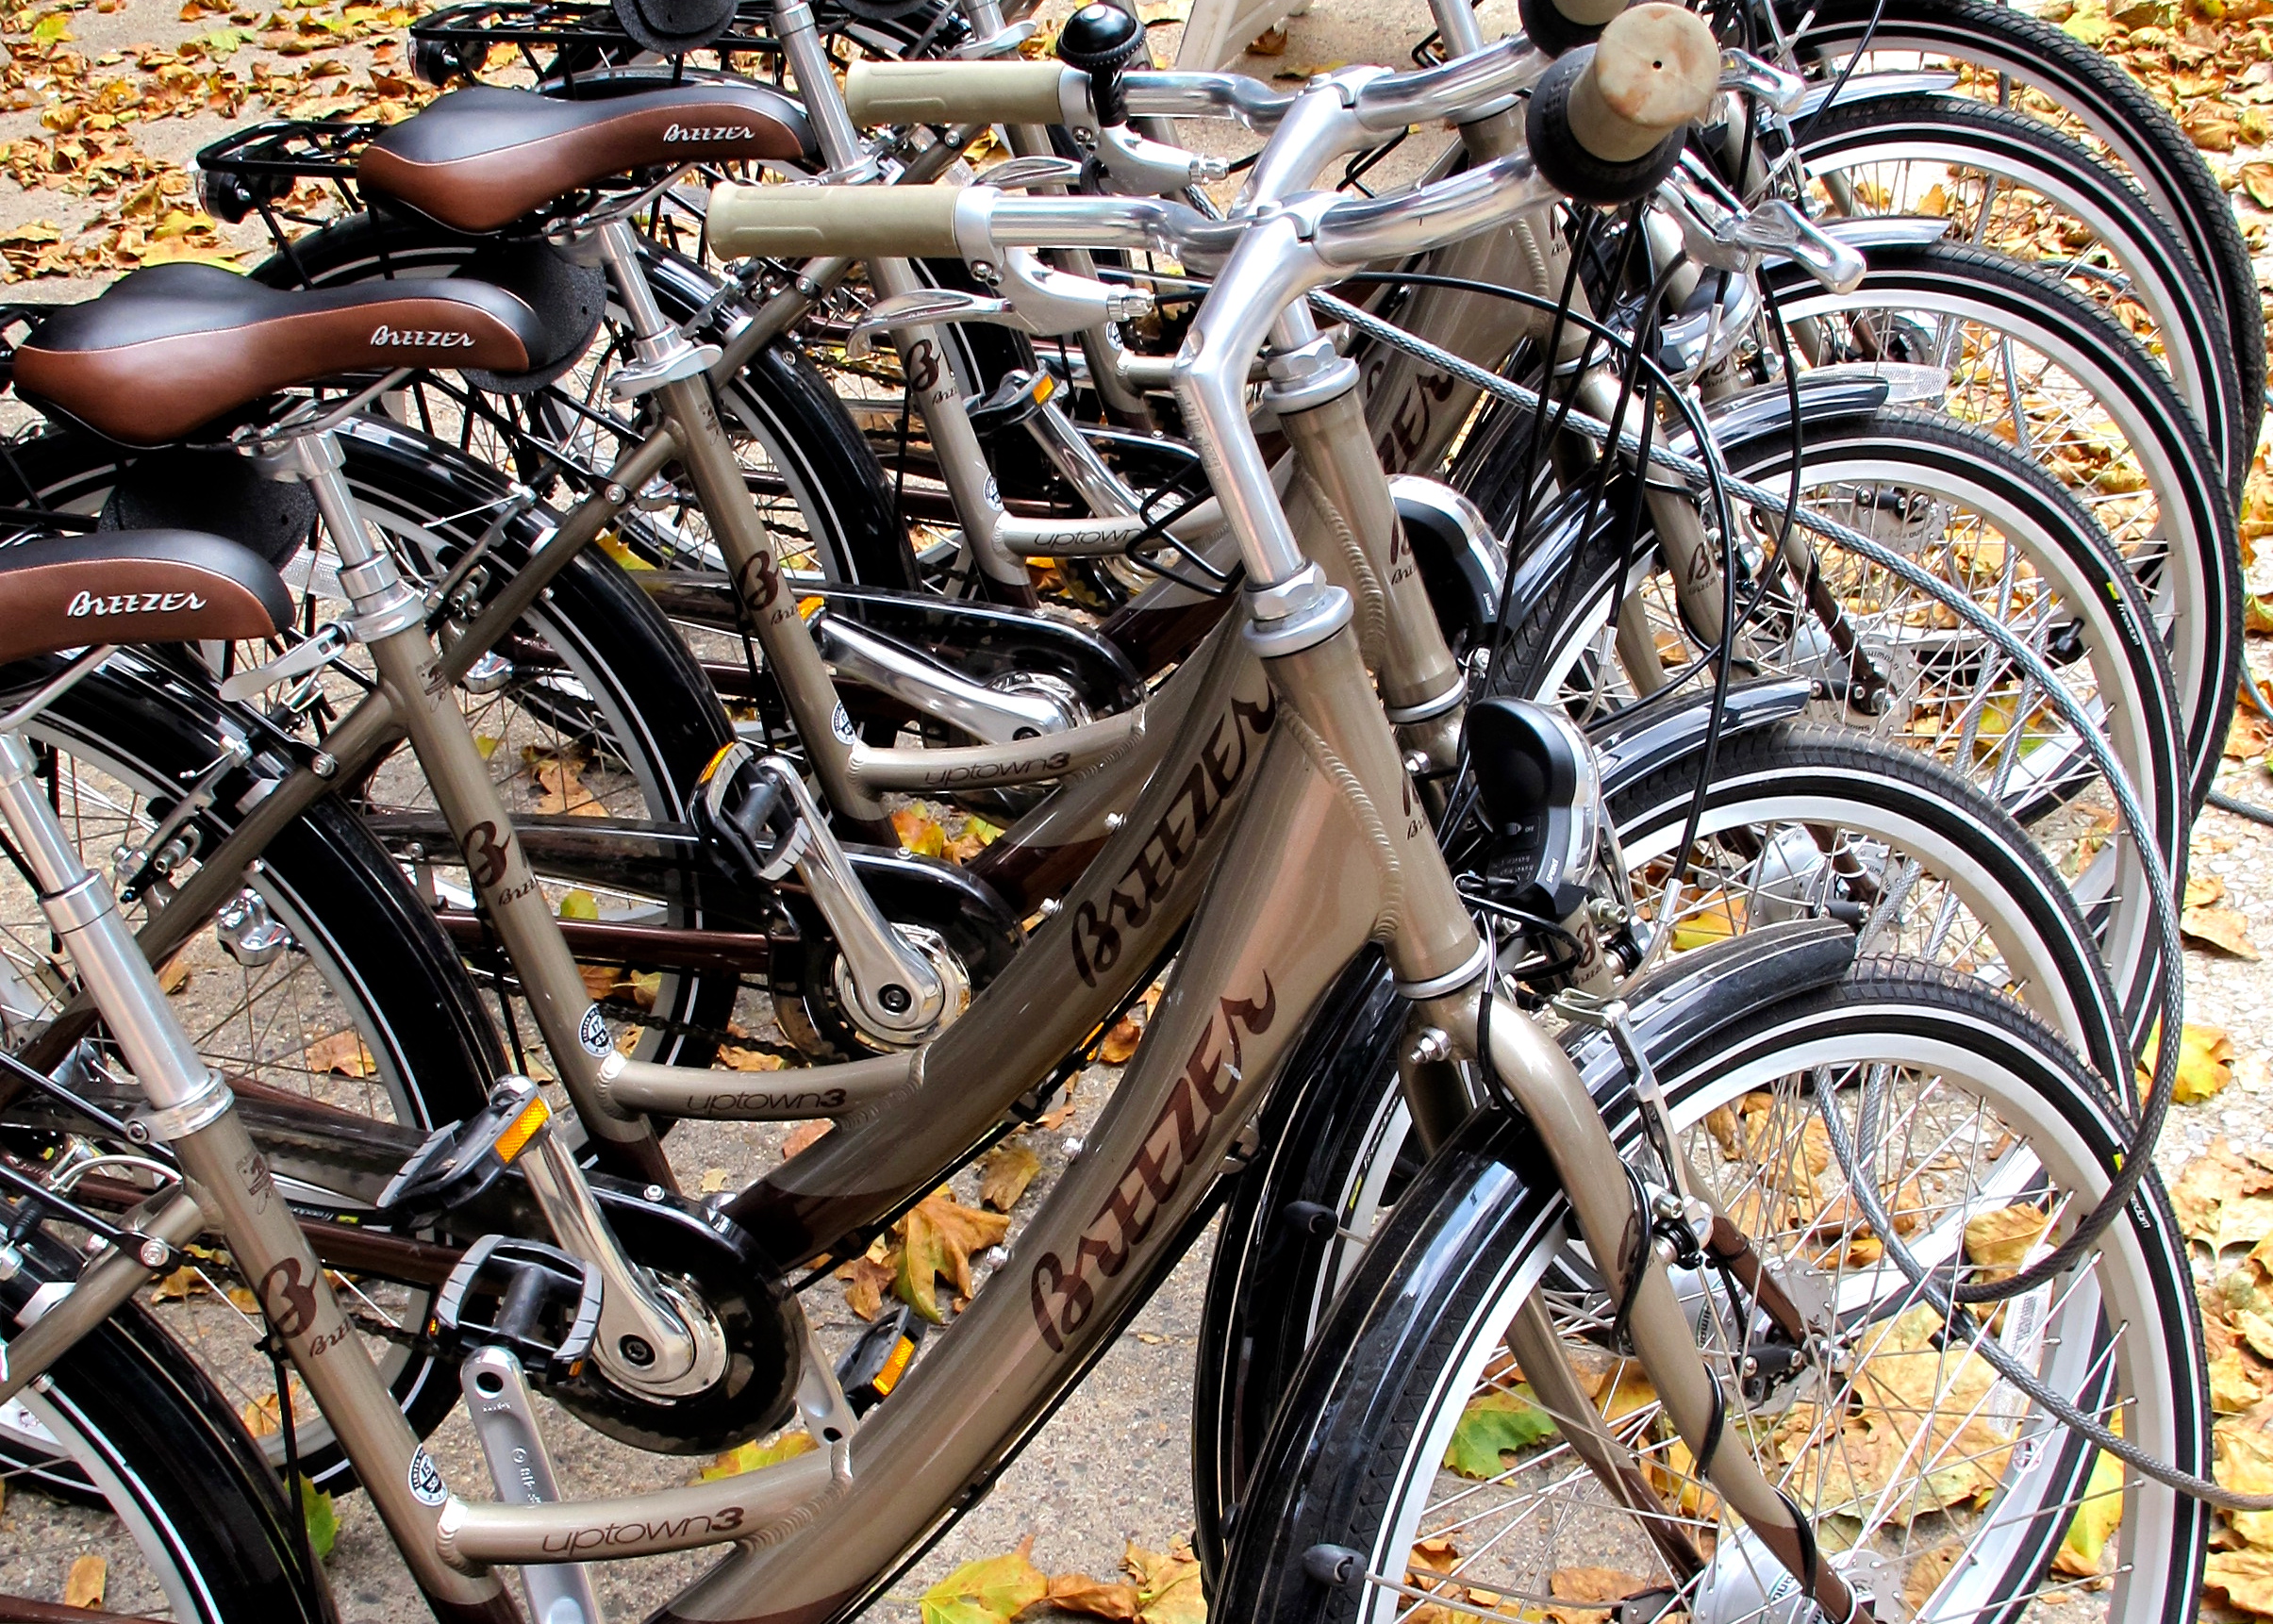 We saw bike rentals this year, but is Philly bike-share coming soon?